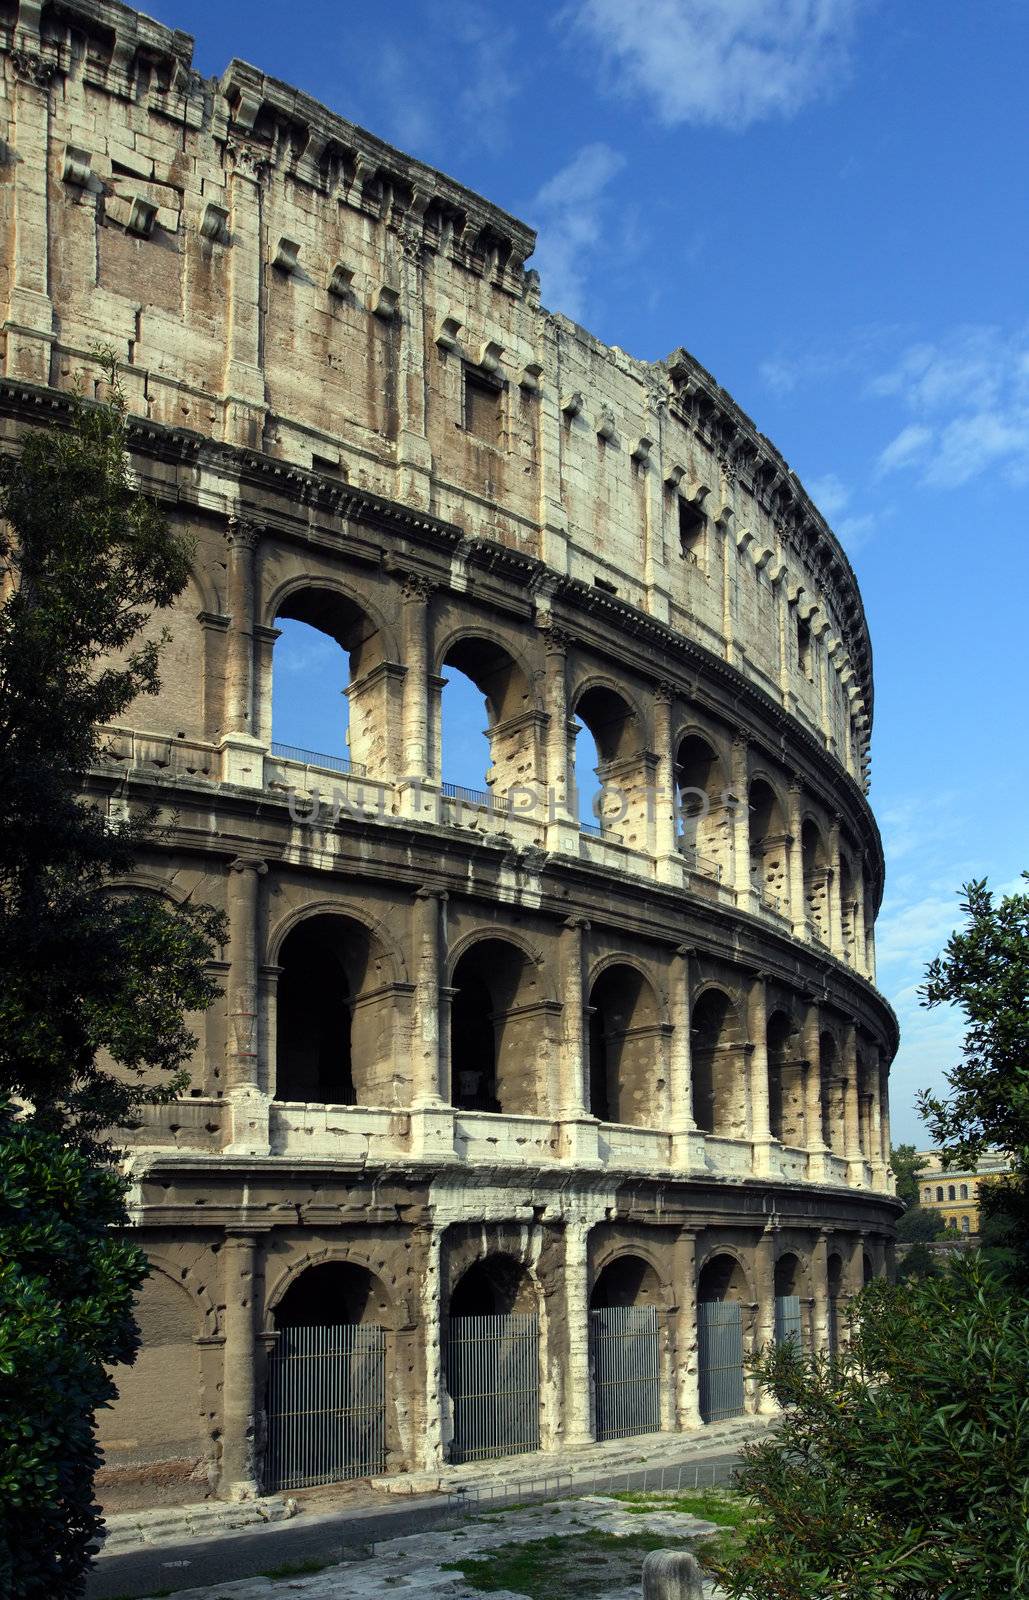 The Colosseum in Rome Italy.
